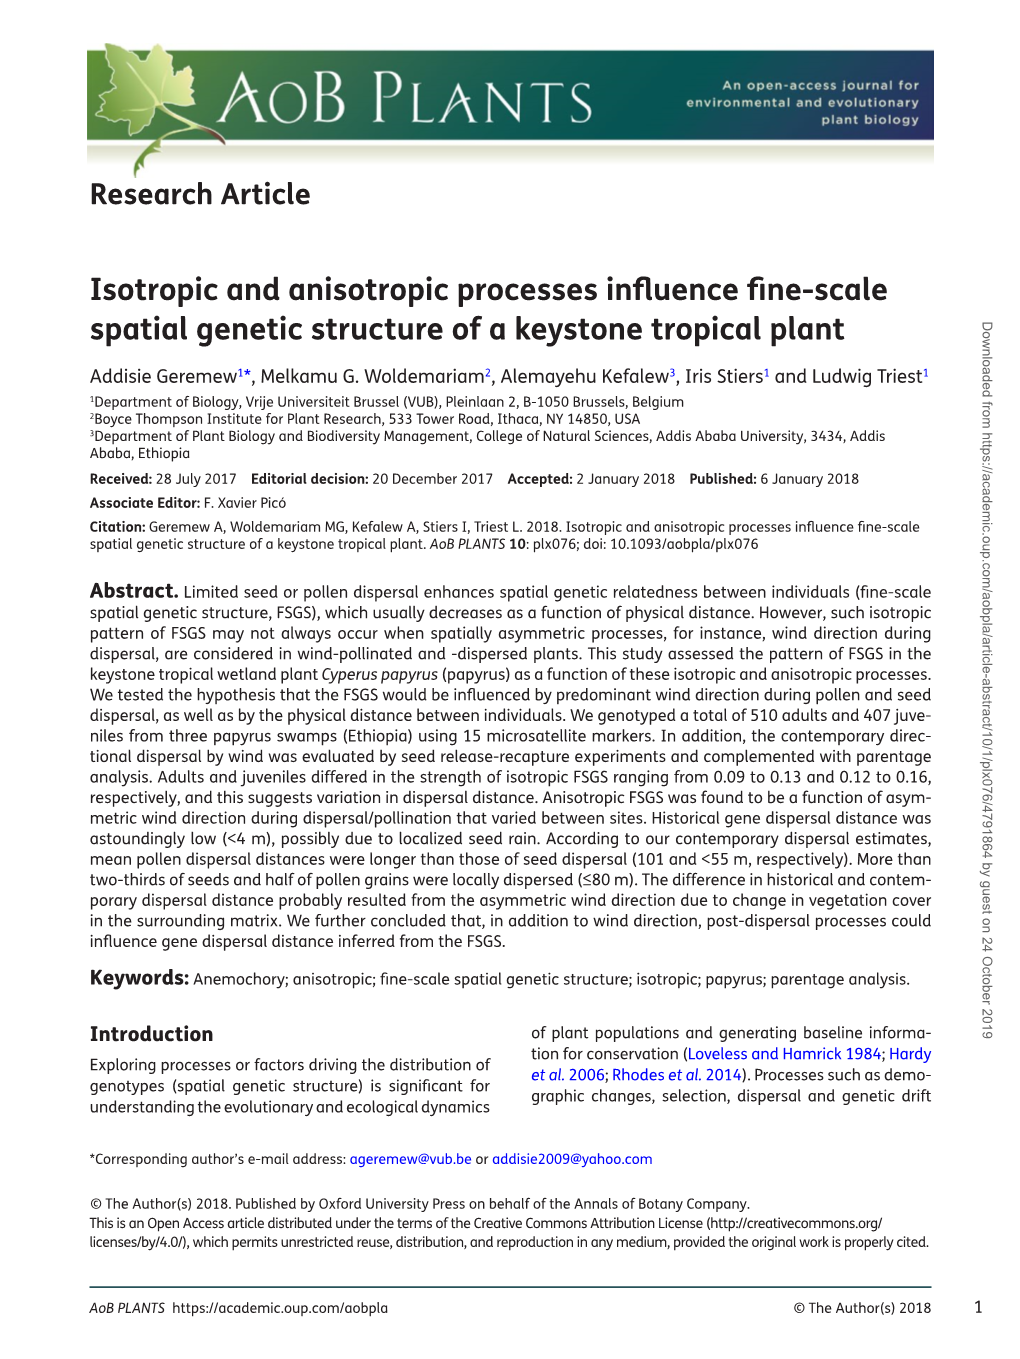 Isotropic and Anisotropic Processes Influence Fine-Scale Spatial Genetic Structure of a Keystone Tropical Plant